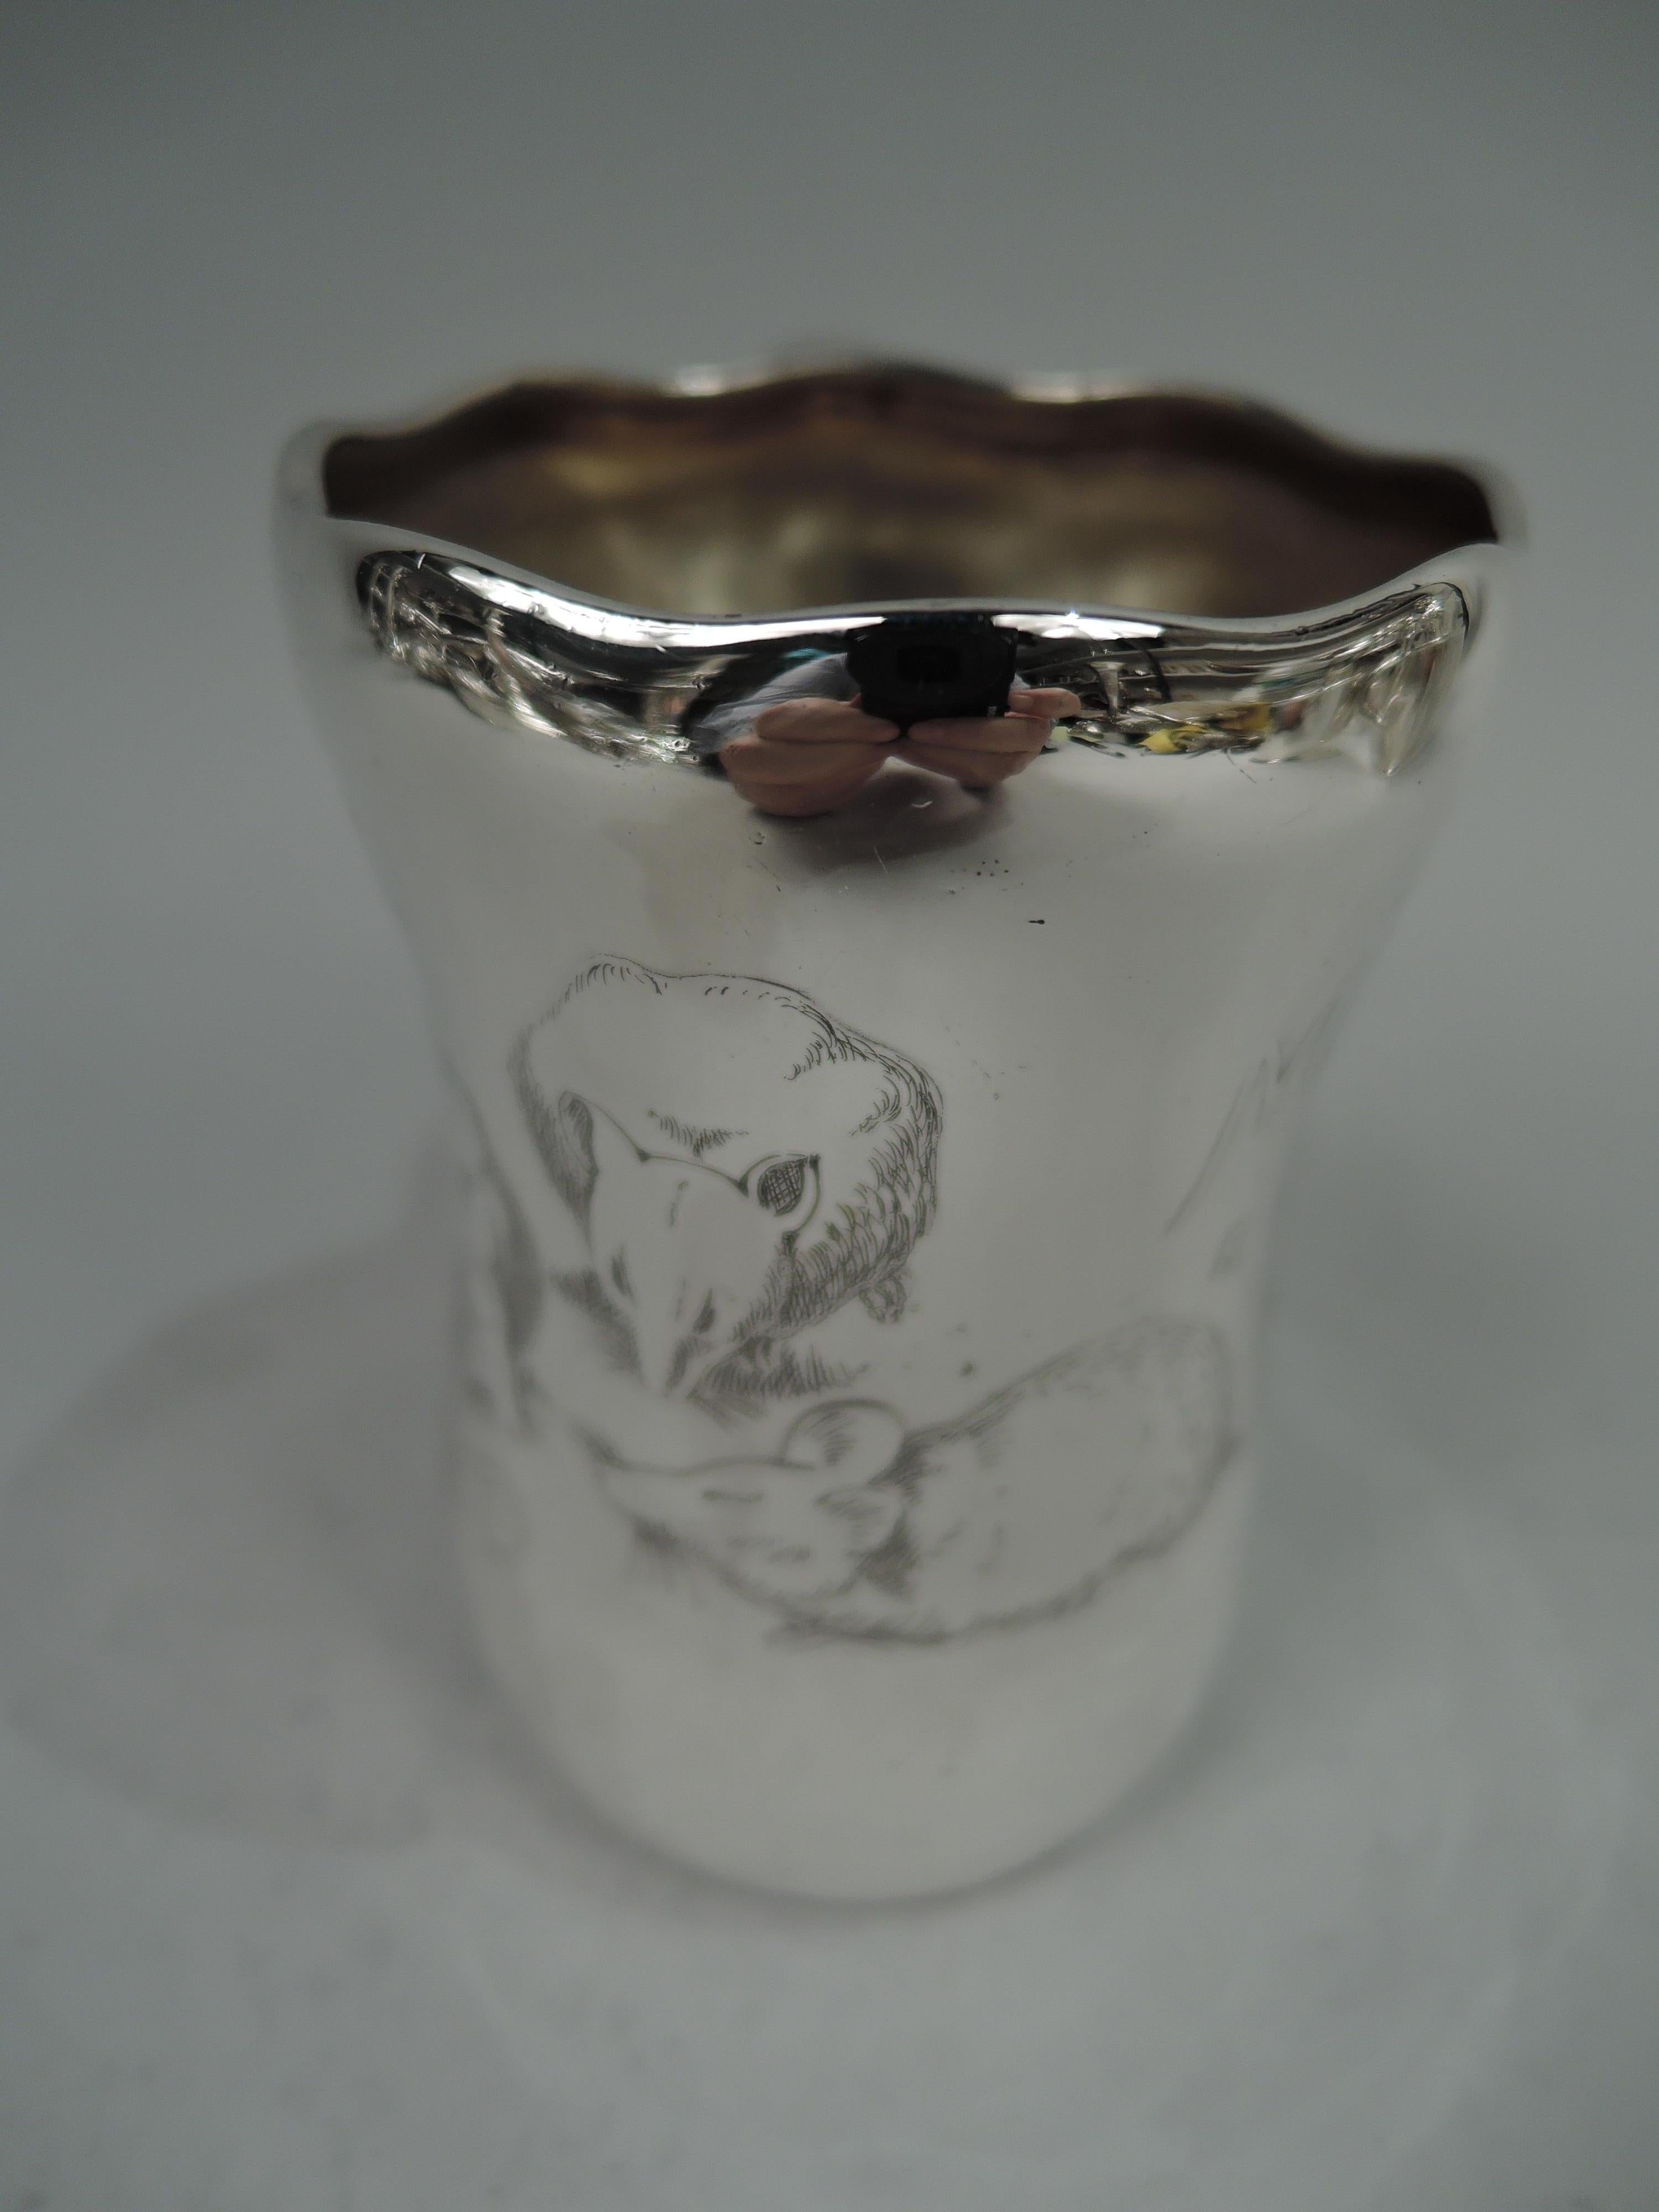 Art Nouveau sterling silver nursery rhyme baby cup. Made by Whiting in New York, ca 1900. Tall and waisted bowl with wavy rim and c-scroll handle with splayed trefoil mount and baluster tail. Engraved depiction of the Three Blind Mice, sightless